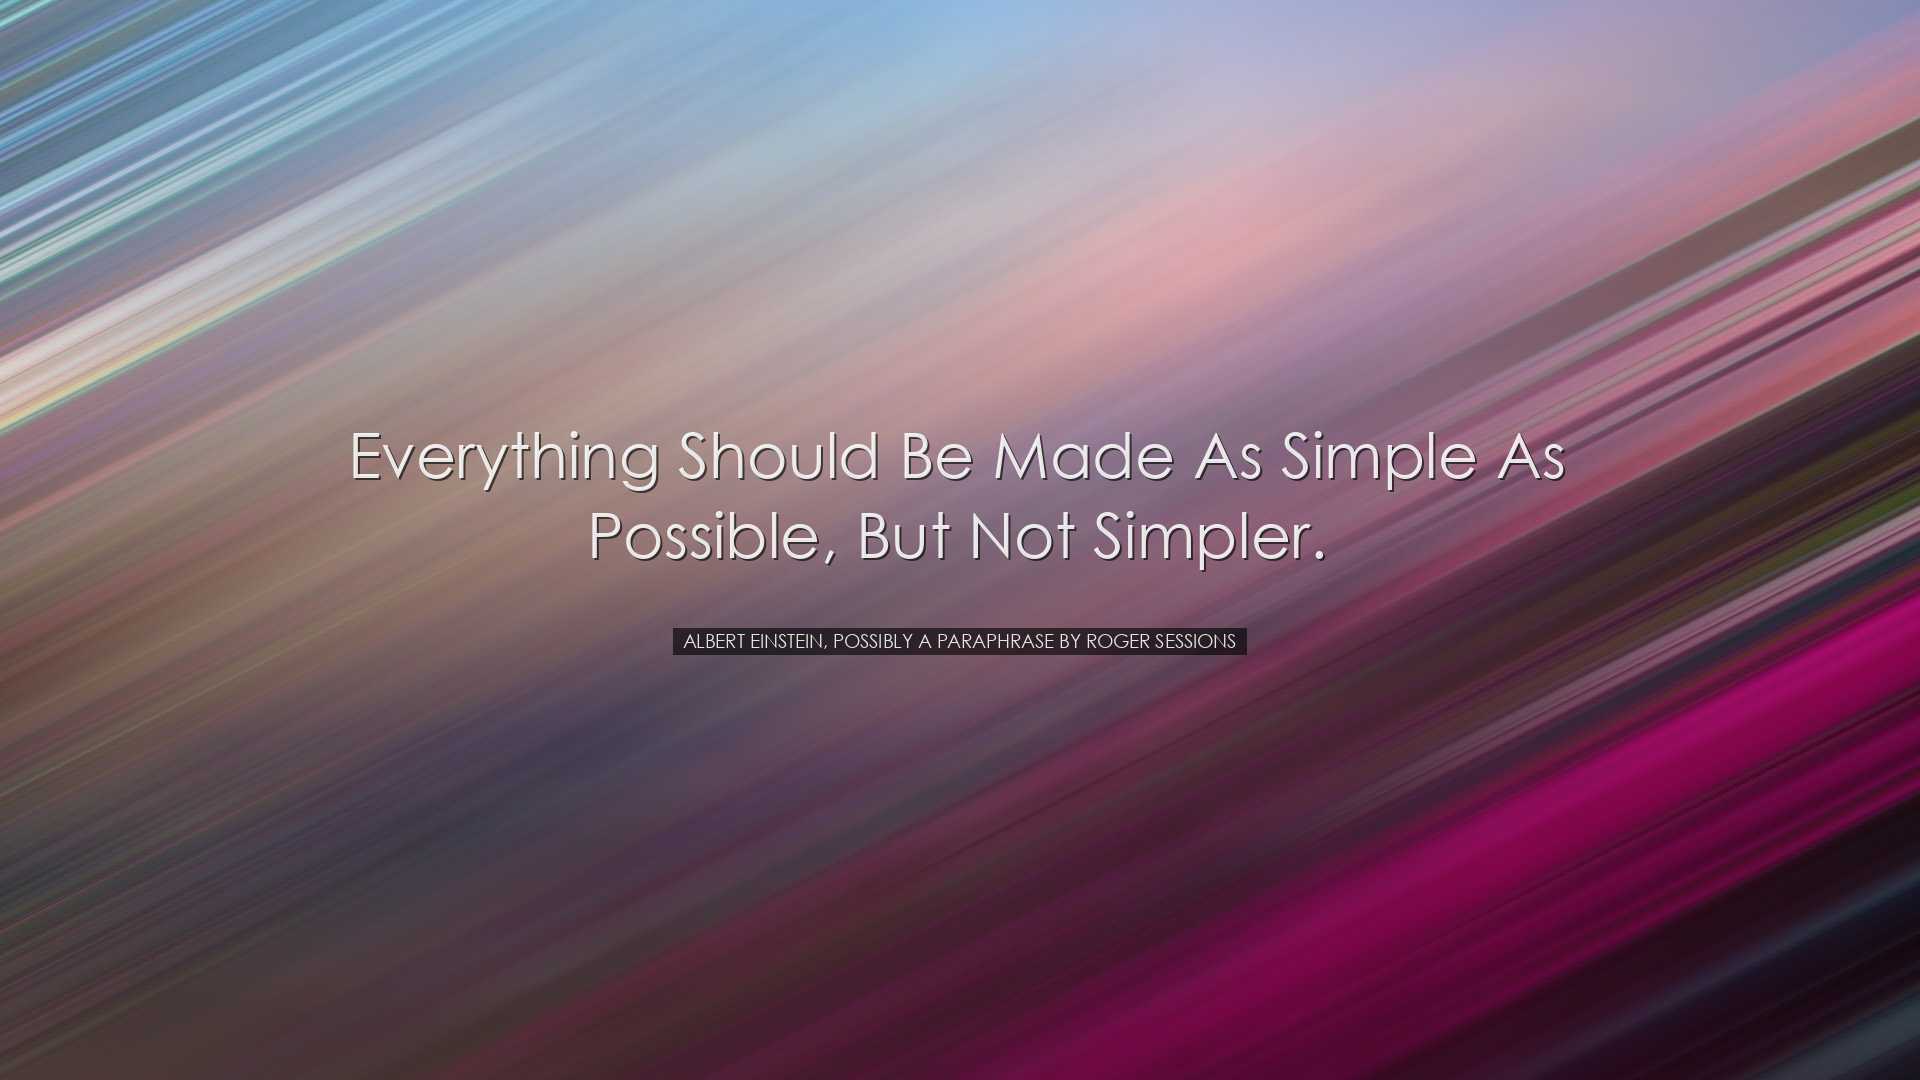 Everything should be made as simple as possible, but not simpler.